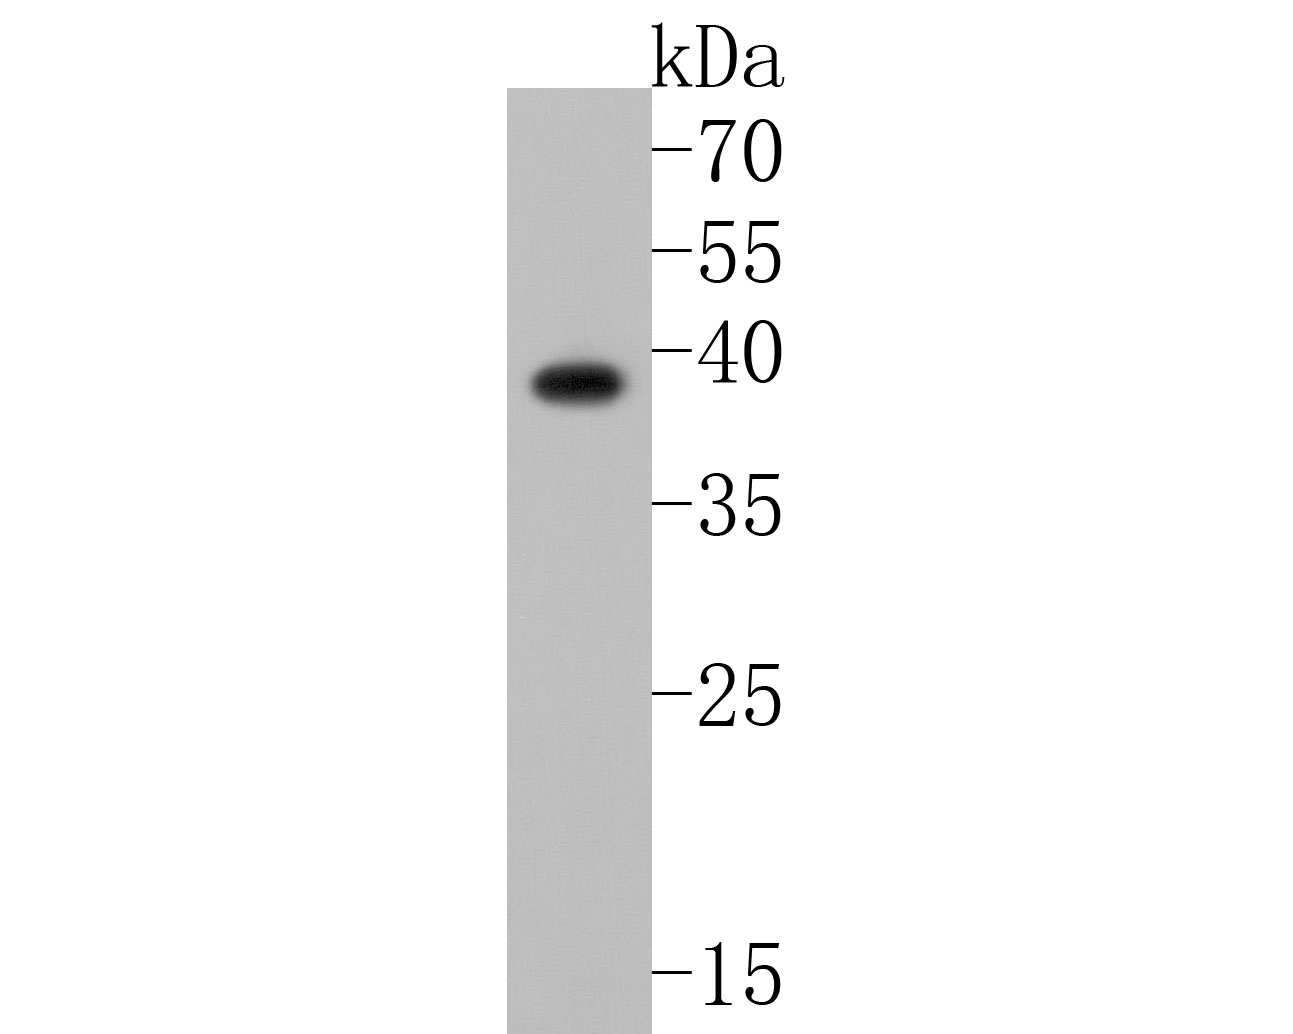 Western blot analysis of MC-2 on SiHa cell lysates. Proteins were transferred to a PVDF membrane and blocked with 5% NFDM/TBST for 1 hour at room temperature. The primary antibody (HA720055, 1/500) was used in 5% NFDM/TBST at room temperature for 2 hours. Goat Anti-Rabbit IgG - HRP Secondary Antibody (HA1001) at 1:200,000 dilution was used for 1 hour at room temperature.